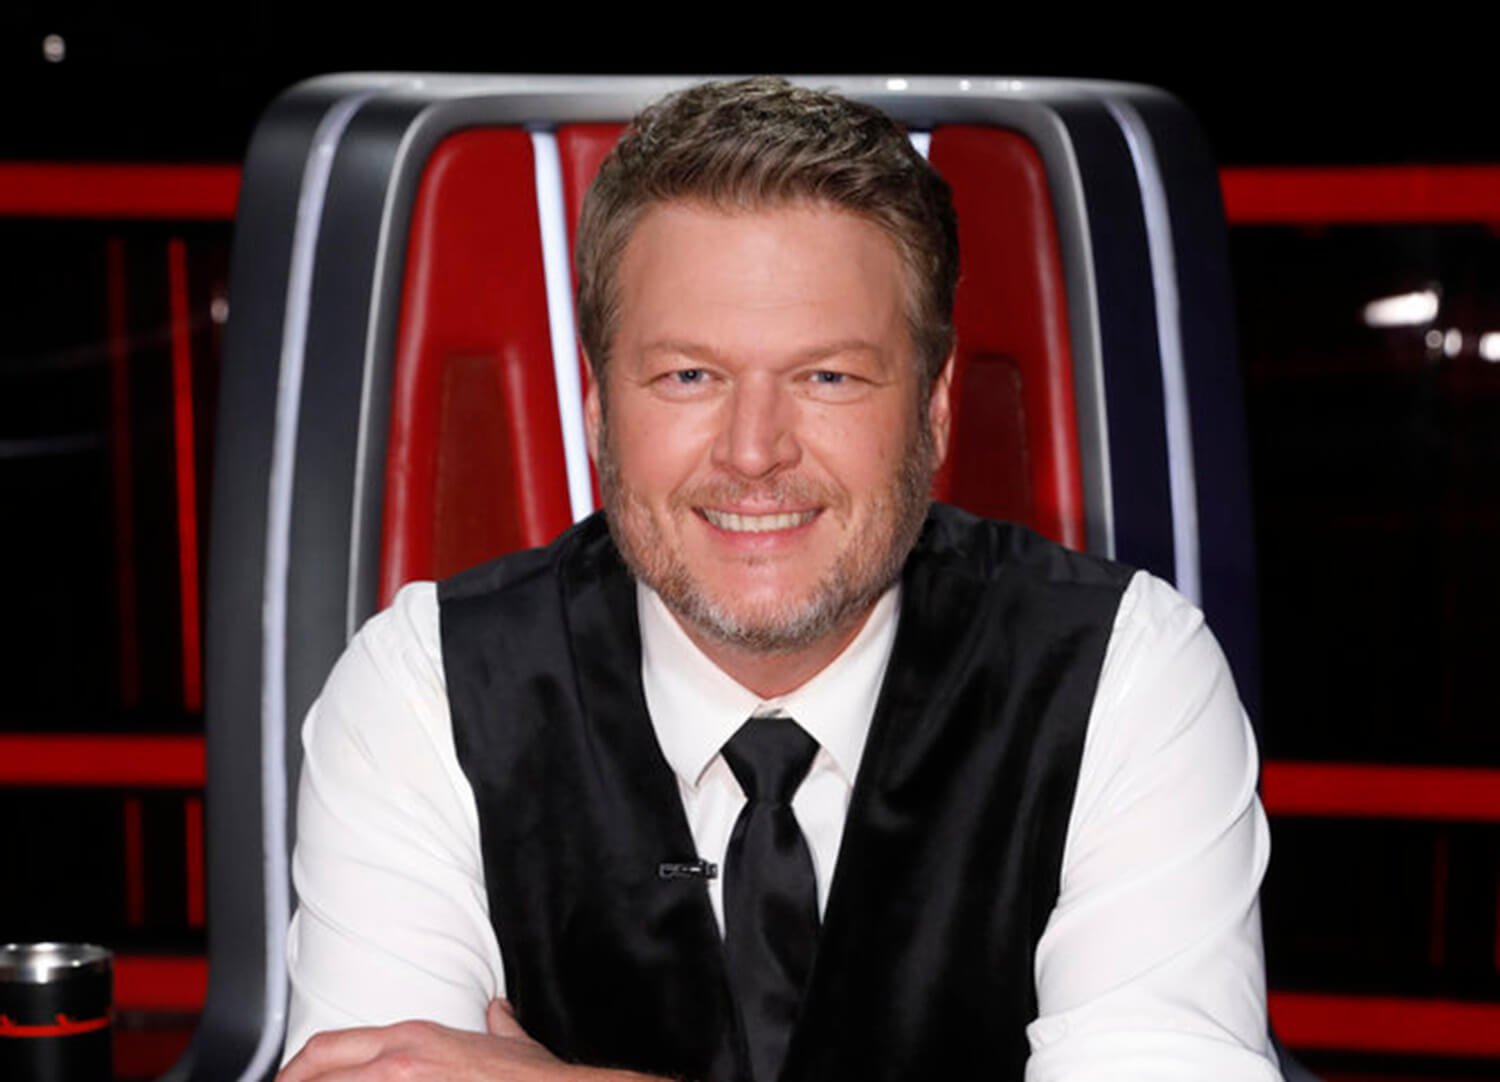 Blake Shelton sits in his chair and smiles while wearing a black vest and tie on The Voice